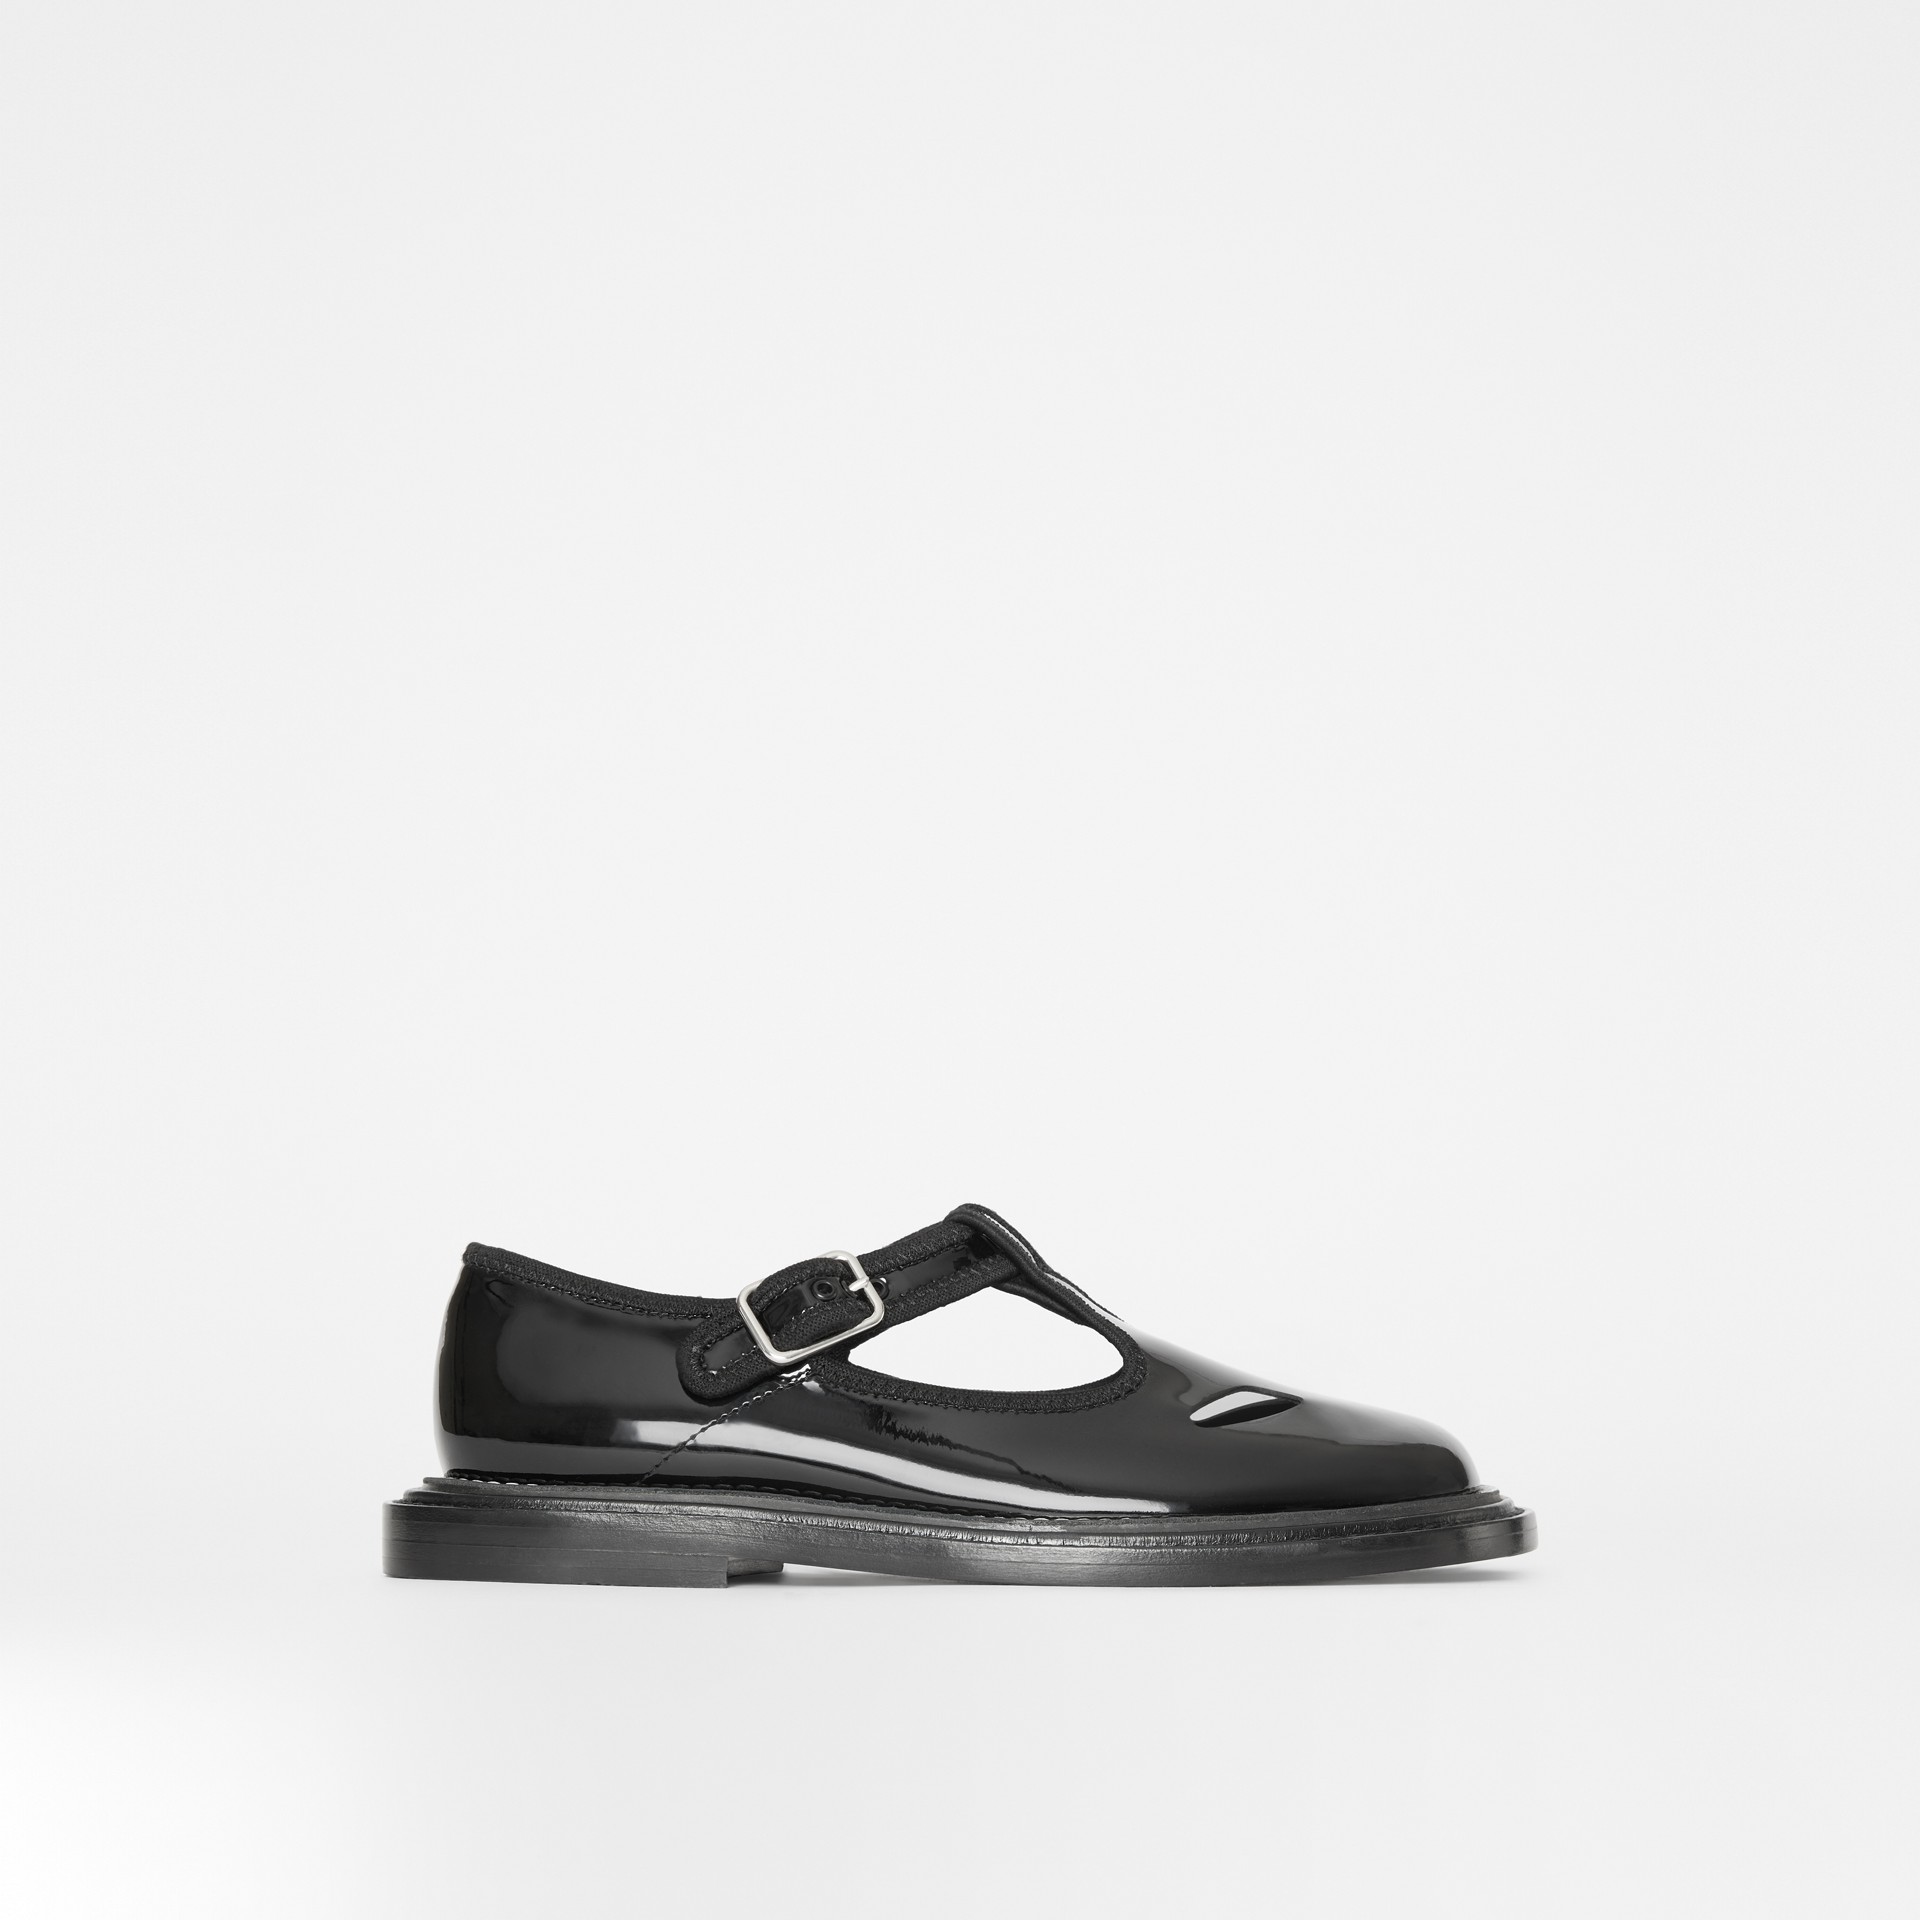 Patent Leather T-bar Shoes in Black - Women | Burberry United States